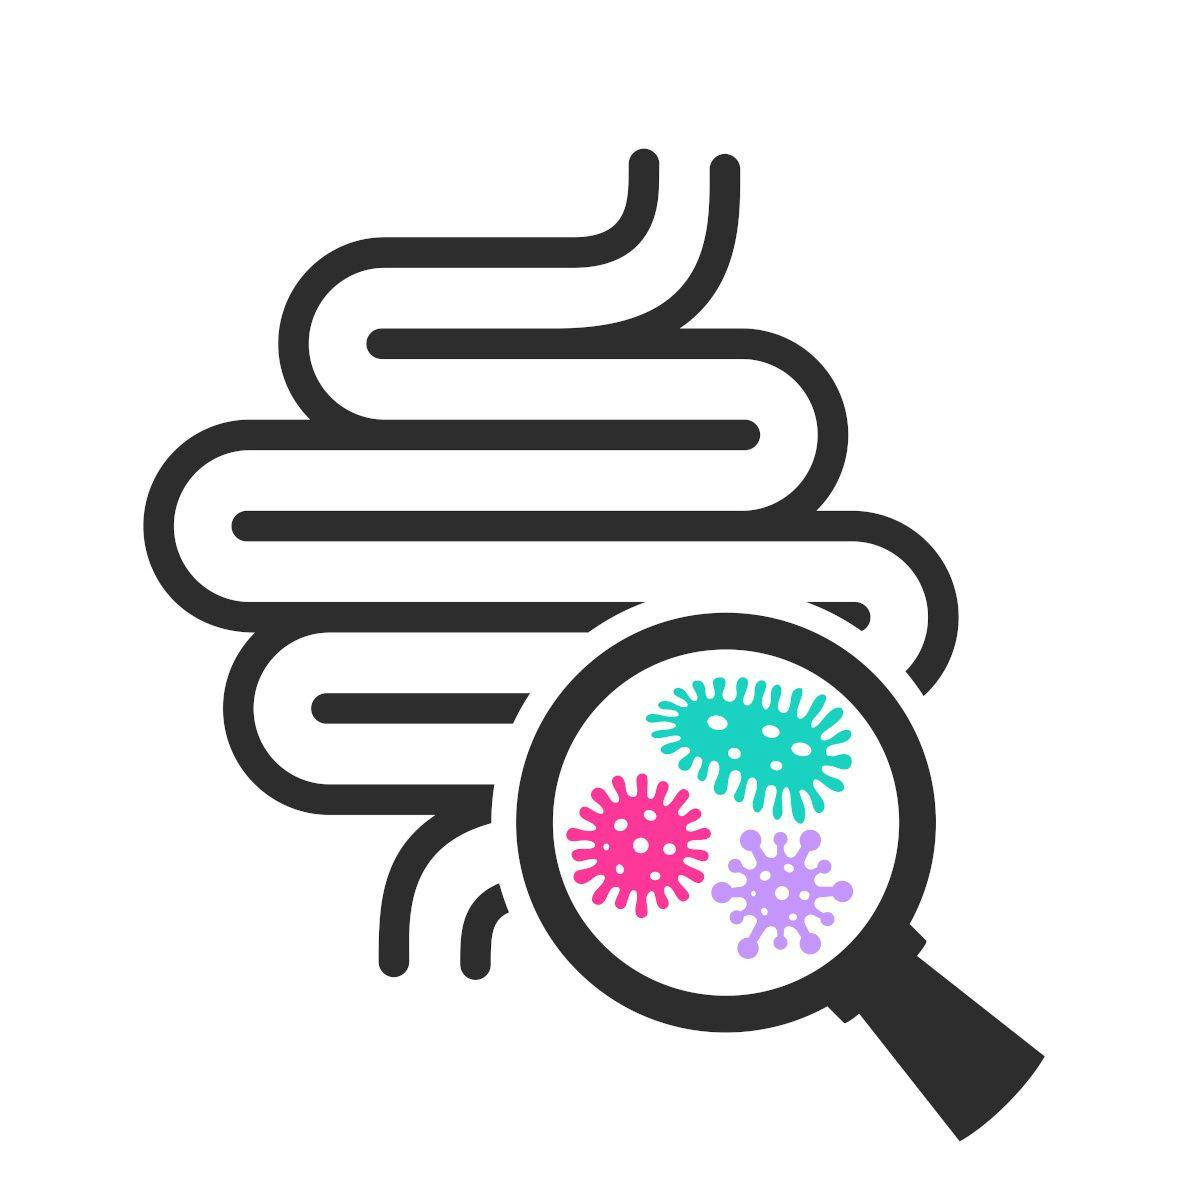 illustration of gut with magnifying glass showing gut bacteria